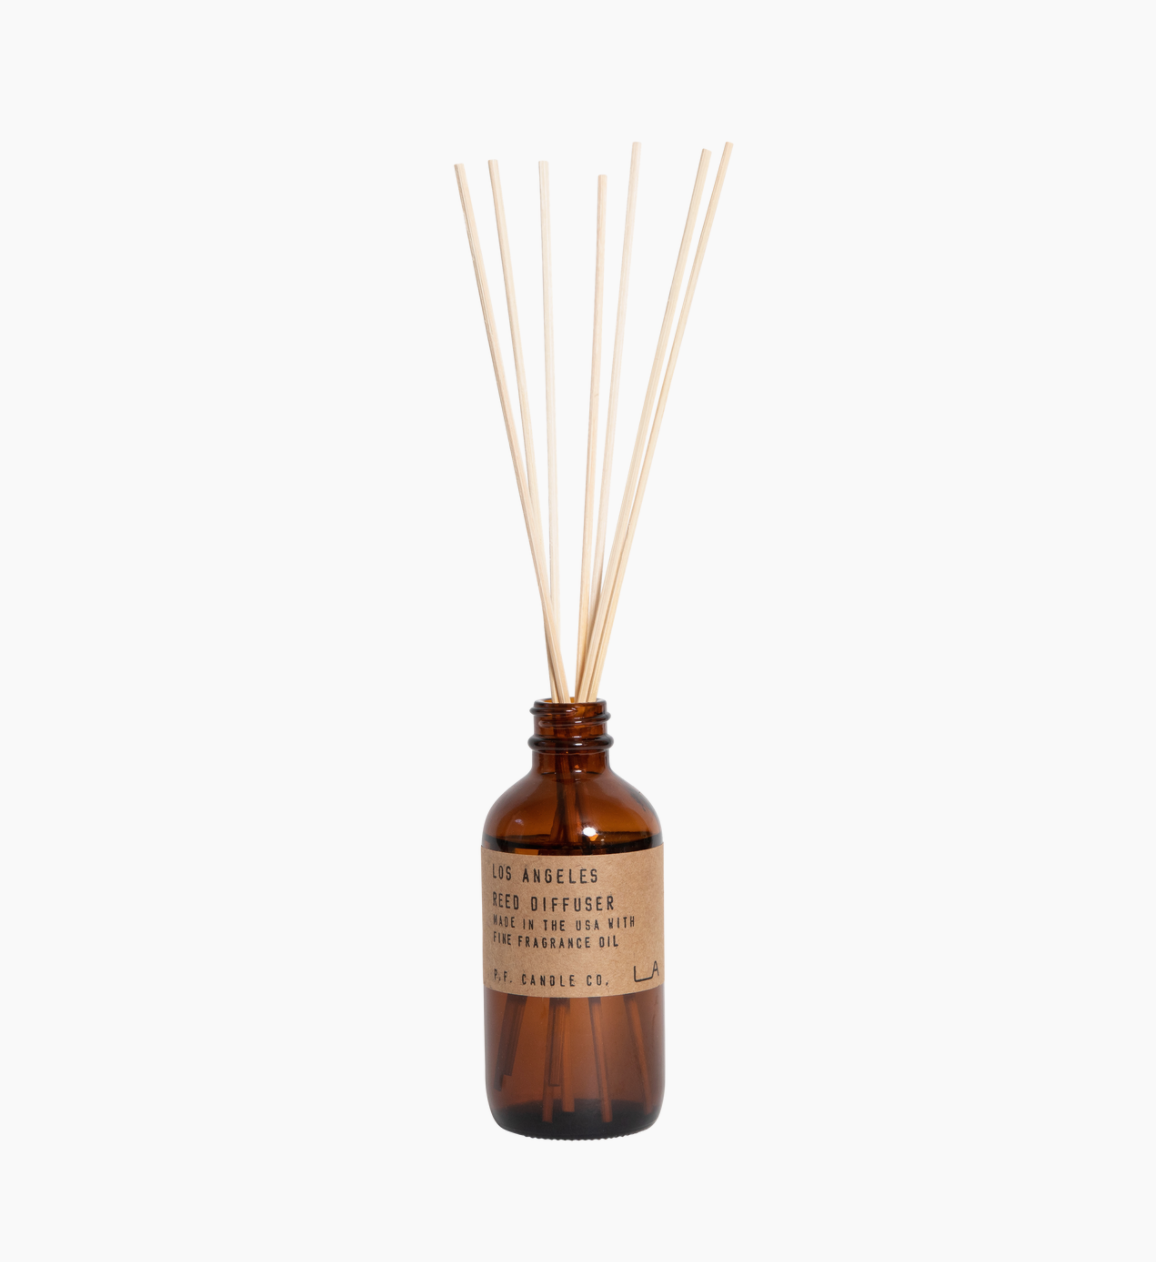 P.F. CANDLE CO LOS ANGELES REED DIFFUSER